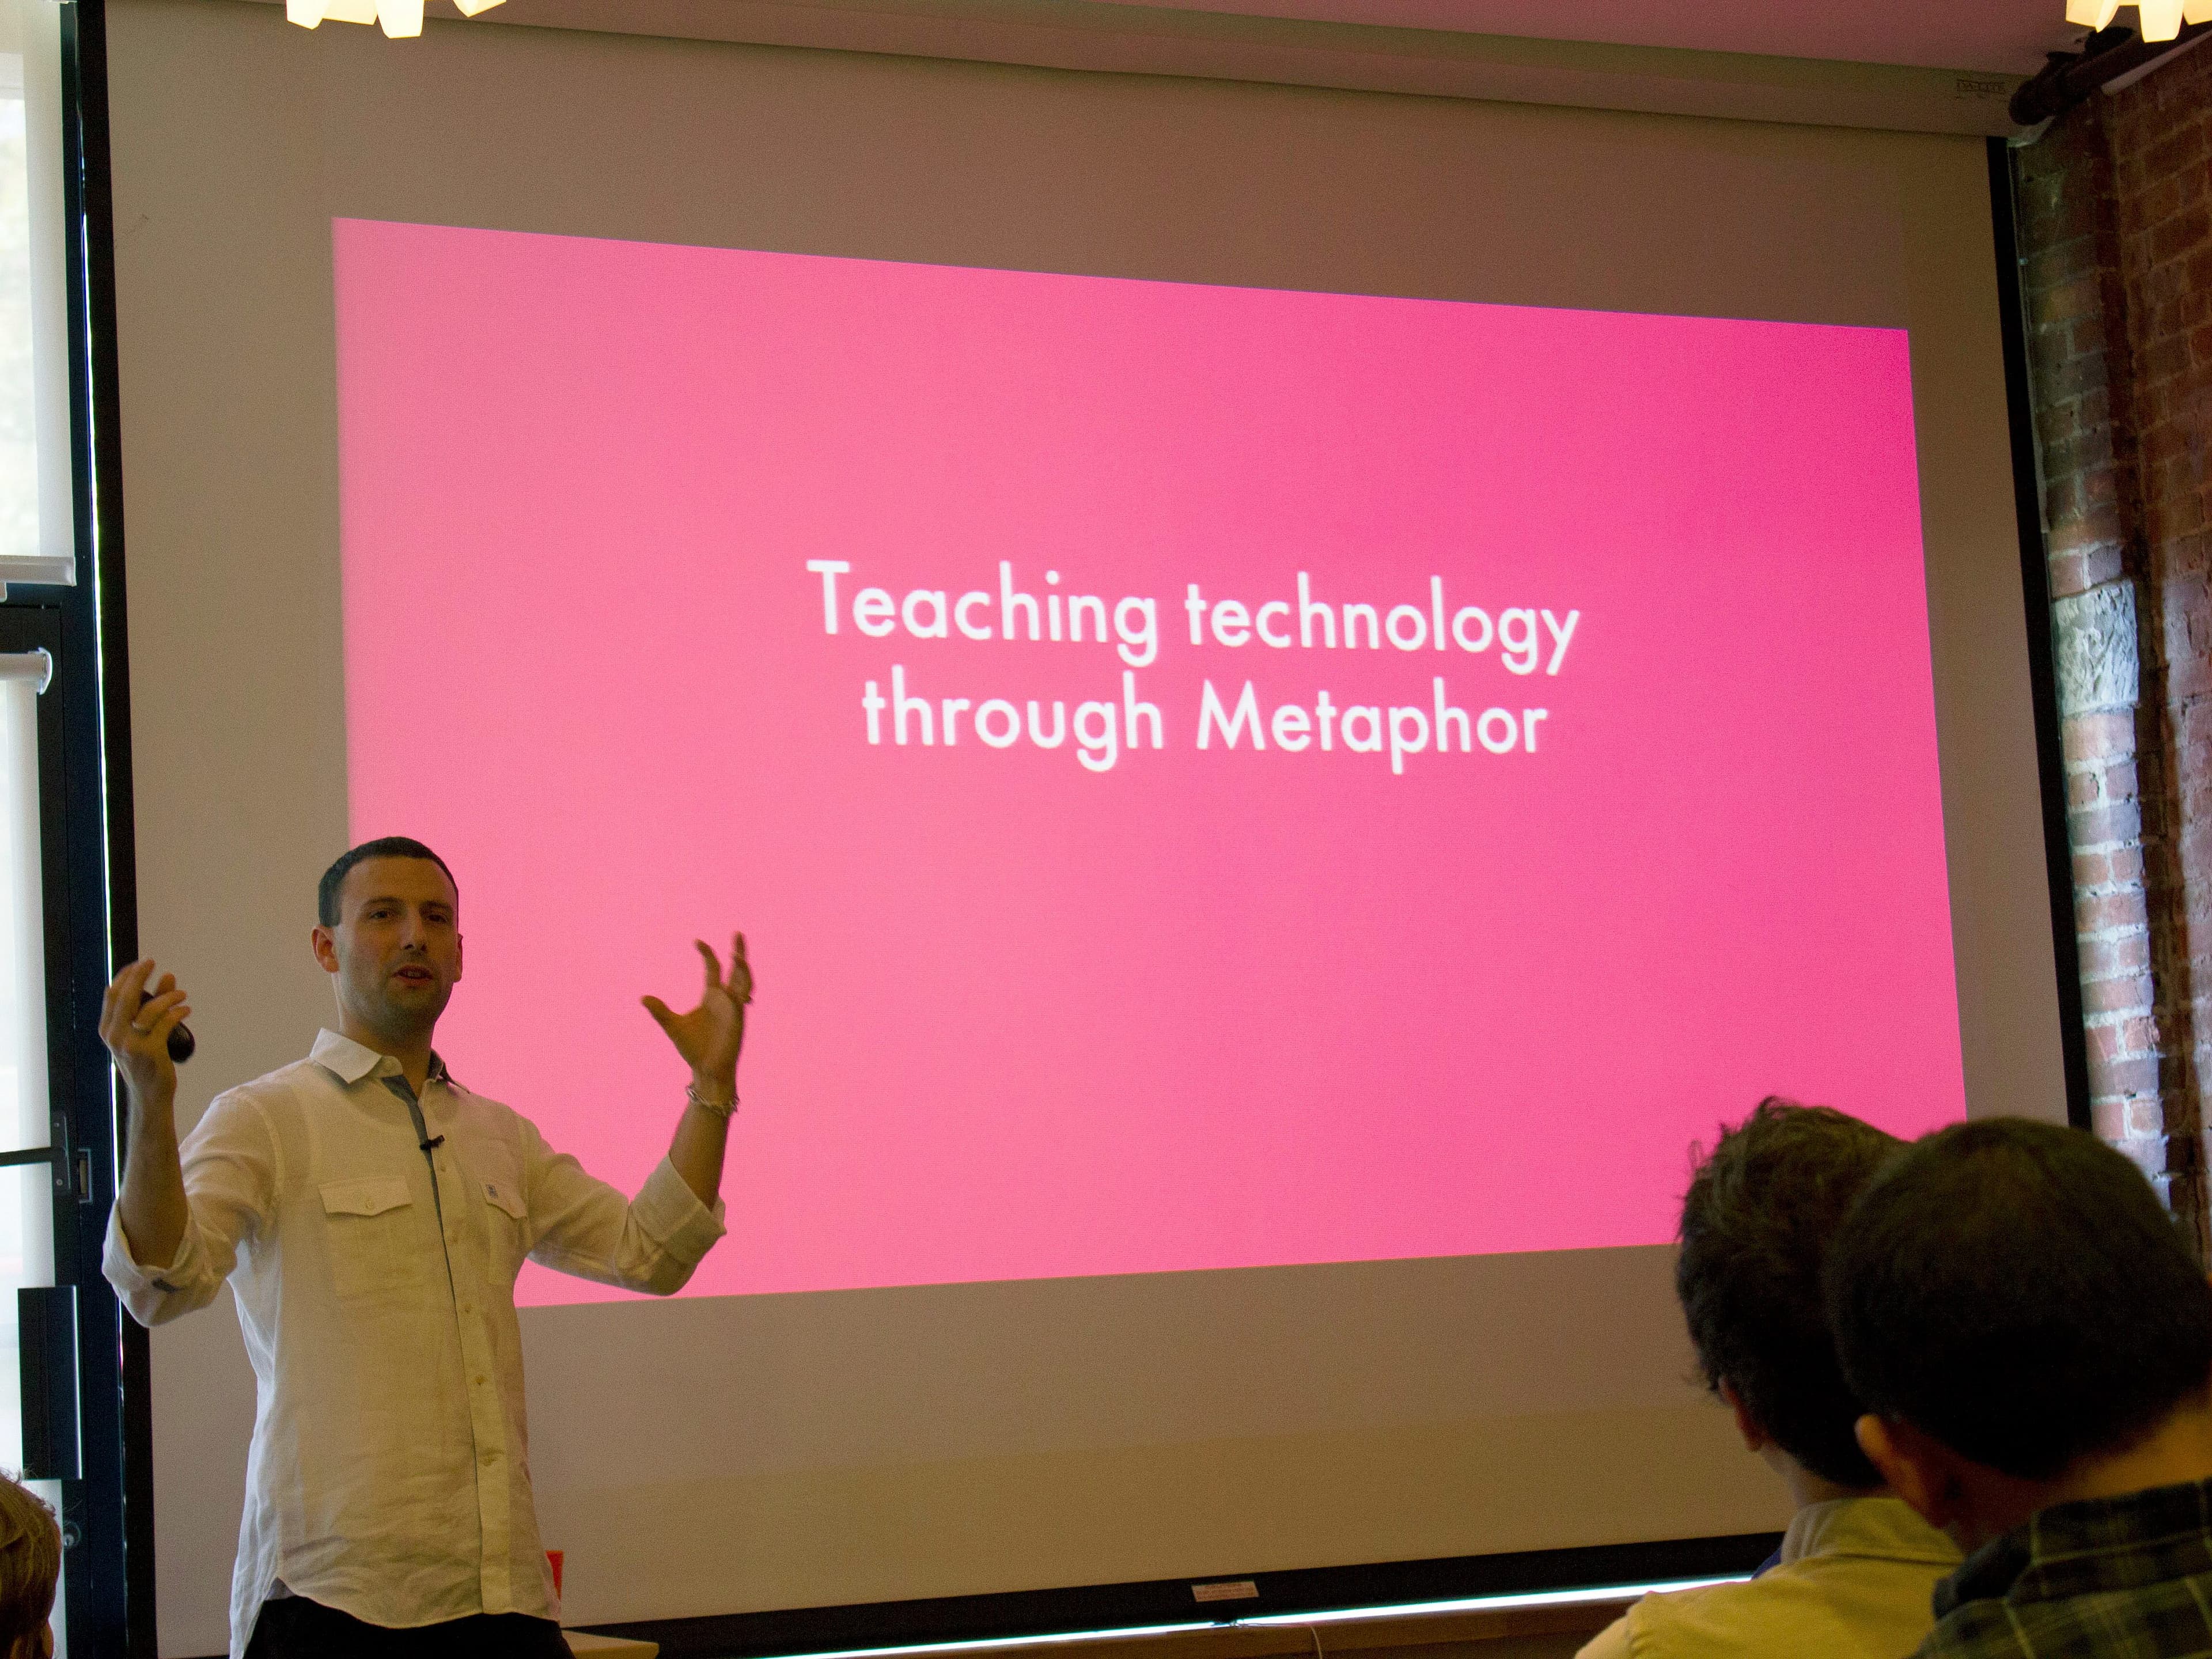 A person in a white shirt is presenting in front of a large screen that displays the slide, "Teaching technology through Metaphor." The screen is pink with white text. The presenter is using hand gestures, and the audience is seated, attentively watching.